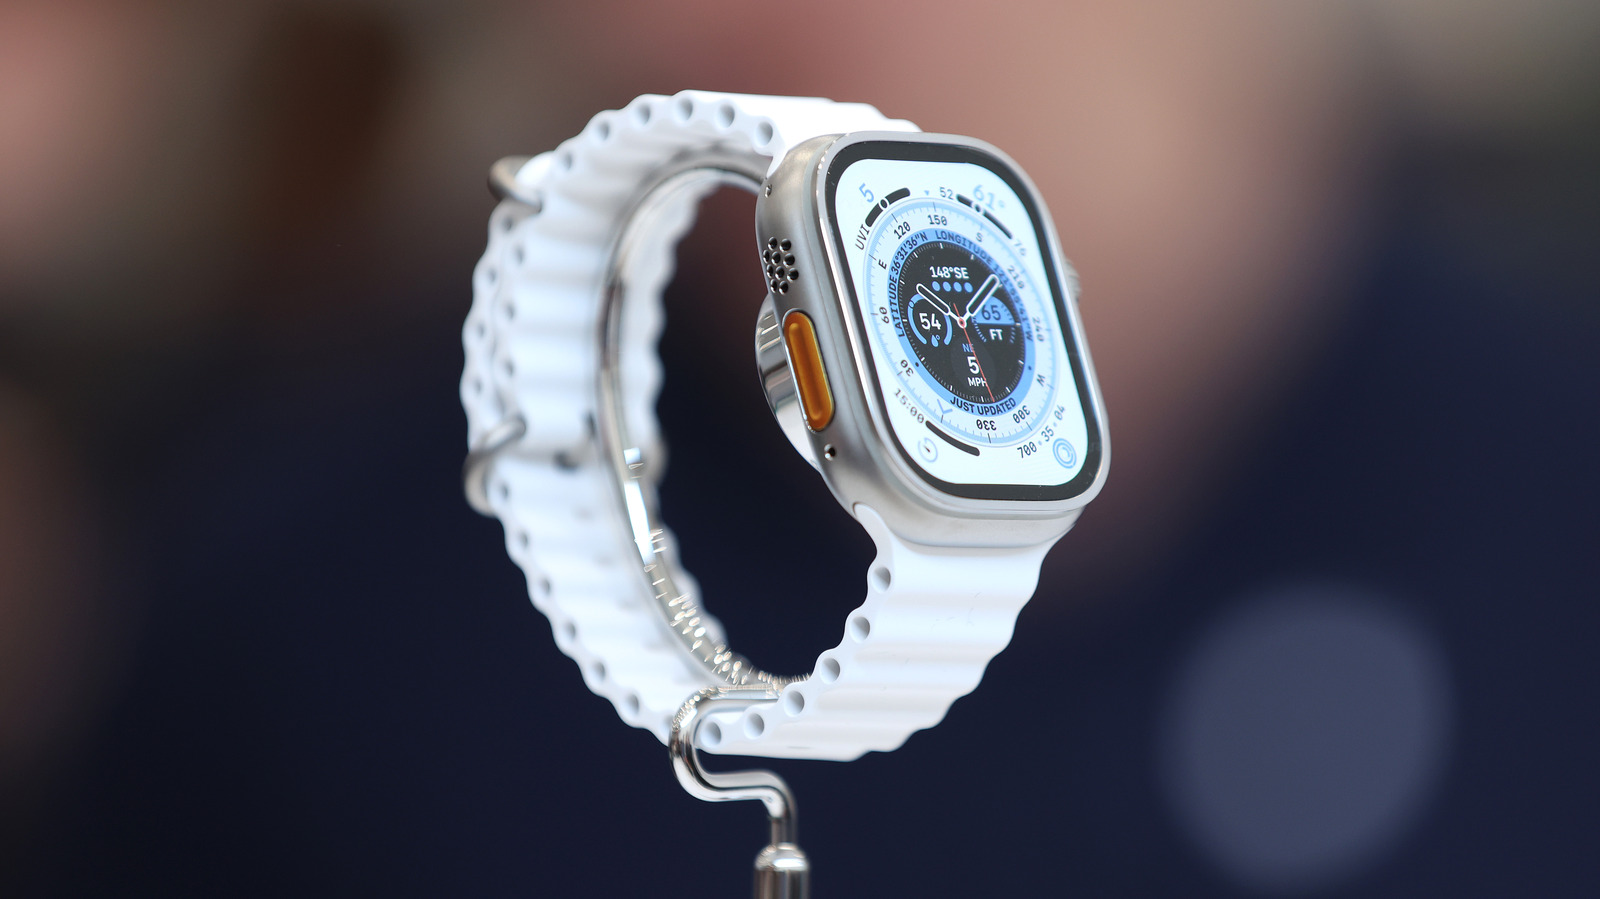 29-of-tech-fans-think-this-is-the-best-feature-of-the-new-apple-watch-ultra-slashgear-survey